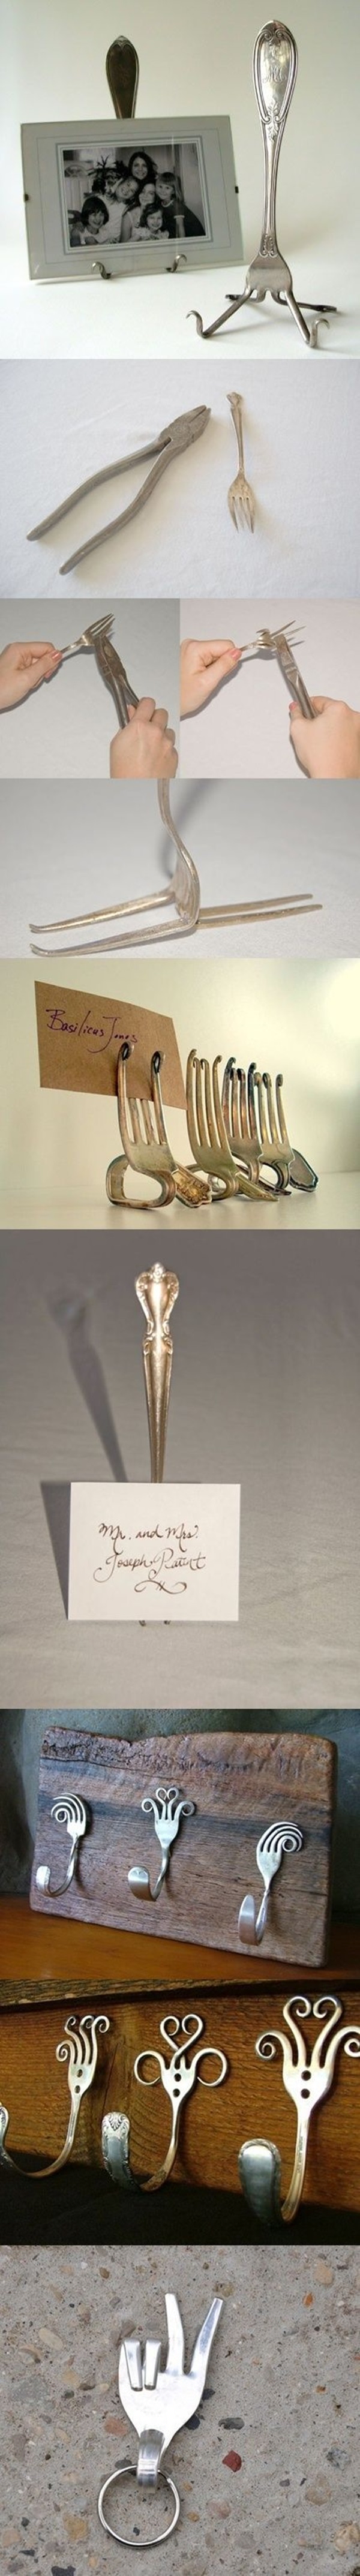 40 Pictures of Amazing Ideas to Reuse Forks 2